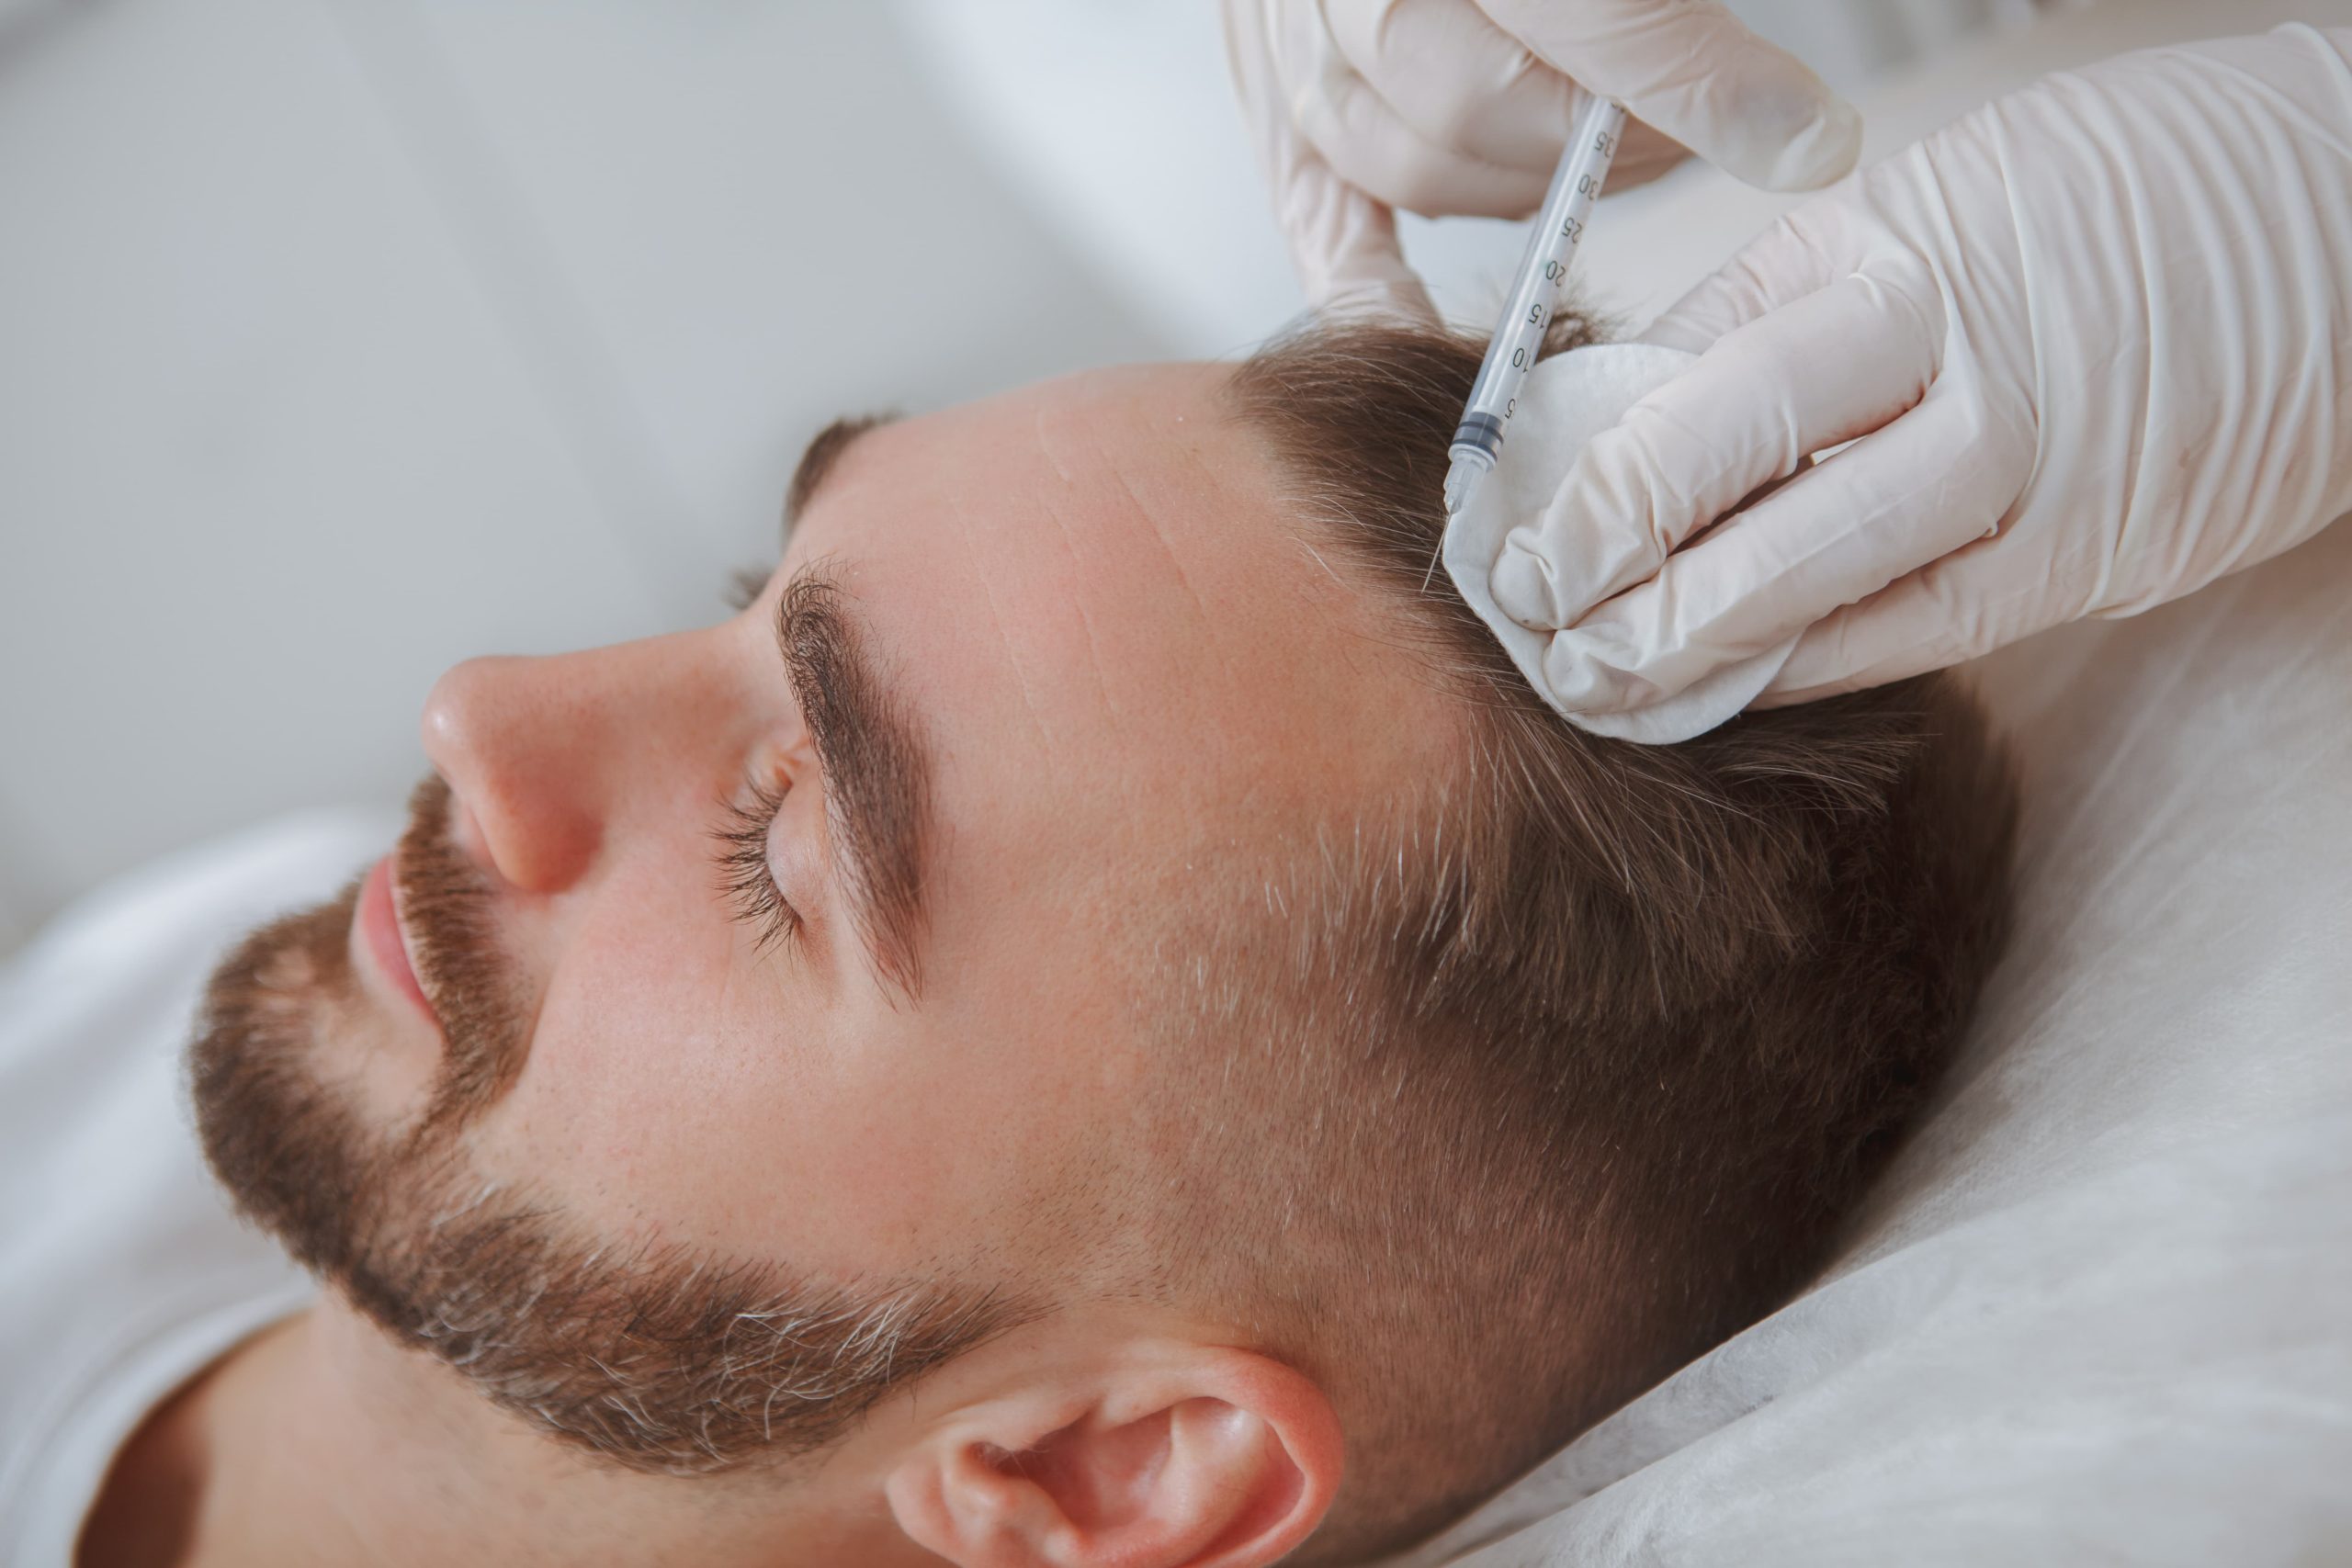 What is Better, a Hair Transplant or PRP?